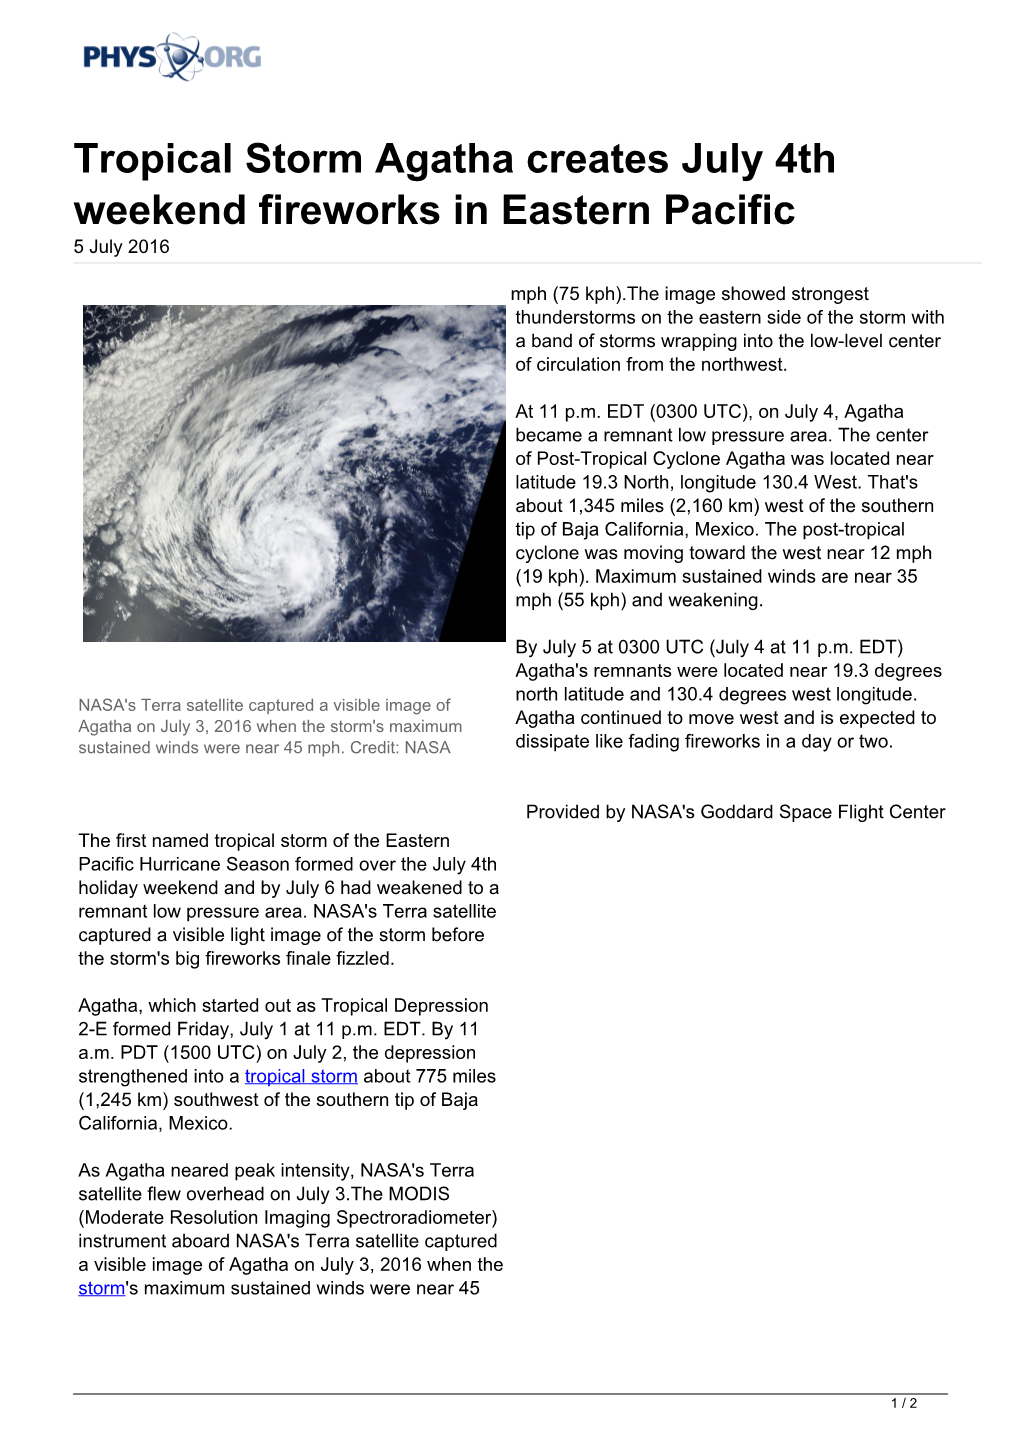 Tropical Storm Agatha Creates July 4Th Weekend Fireworks in Eastern Pacific 5 July 2016